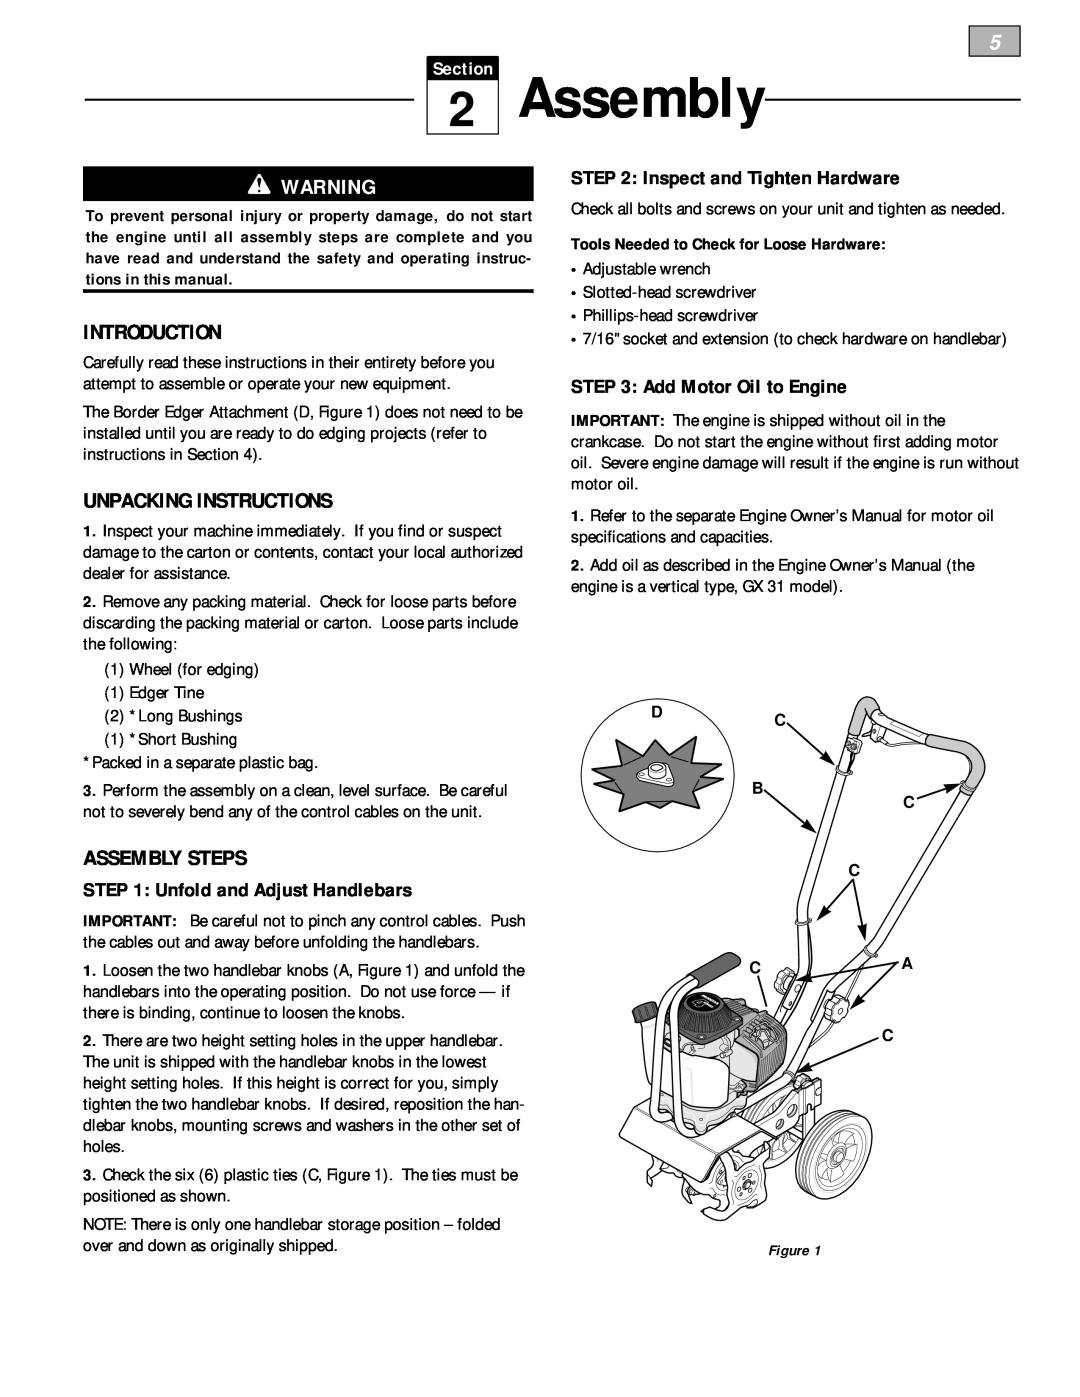 Bolens 12228 owner manual Introduction, Unpacking Instructions, Assembly Steps, Unfold and Adjust Handlebars, Section 